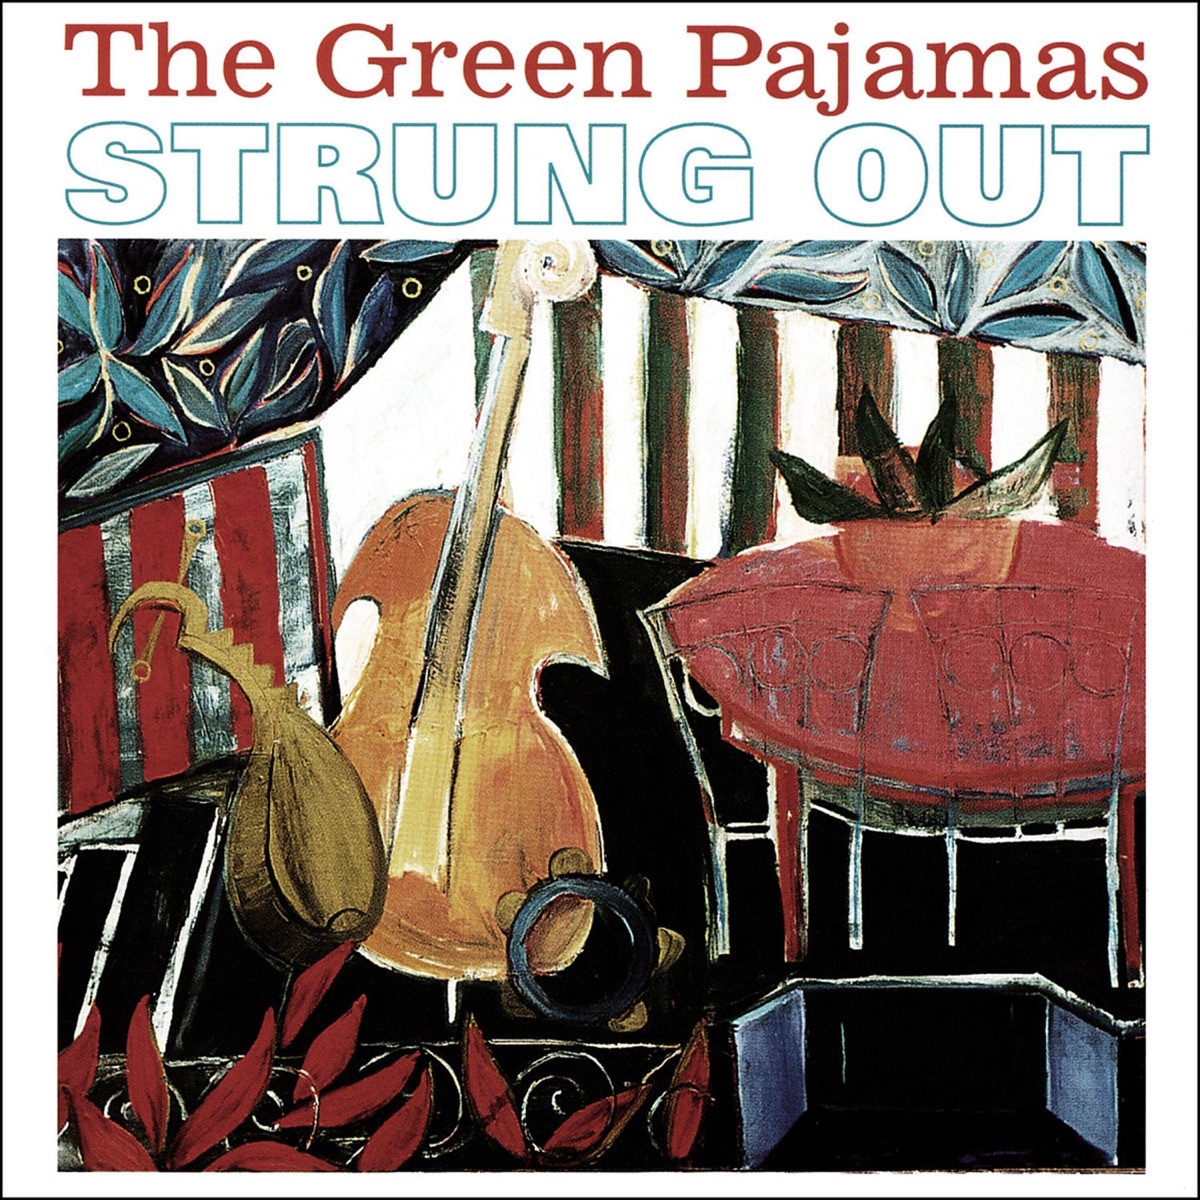 If You Knew What I Dreamed ... The Green Pajamas Play the Jeff Kelly  Songbook by The Green Pajamas on Apple Music